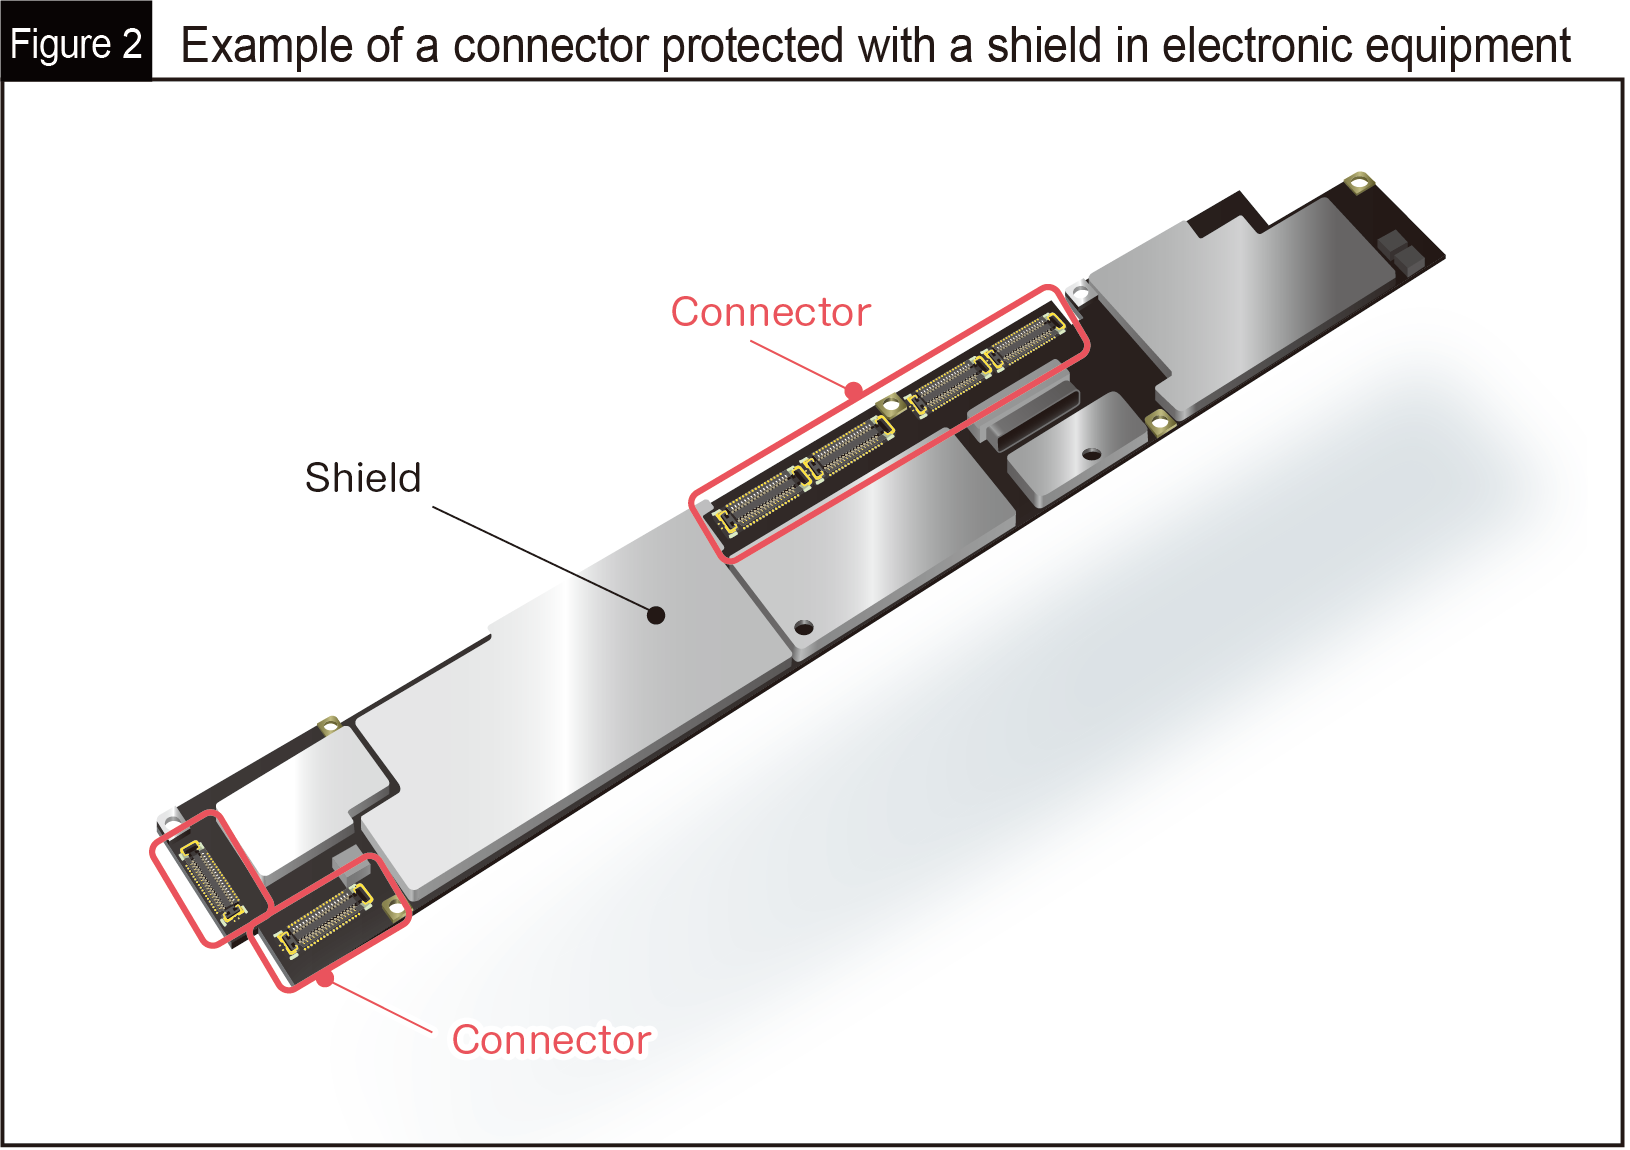 Fig. 2 Example of a connector protected with a shield in electronic equipment